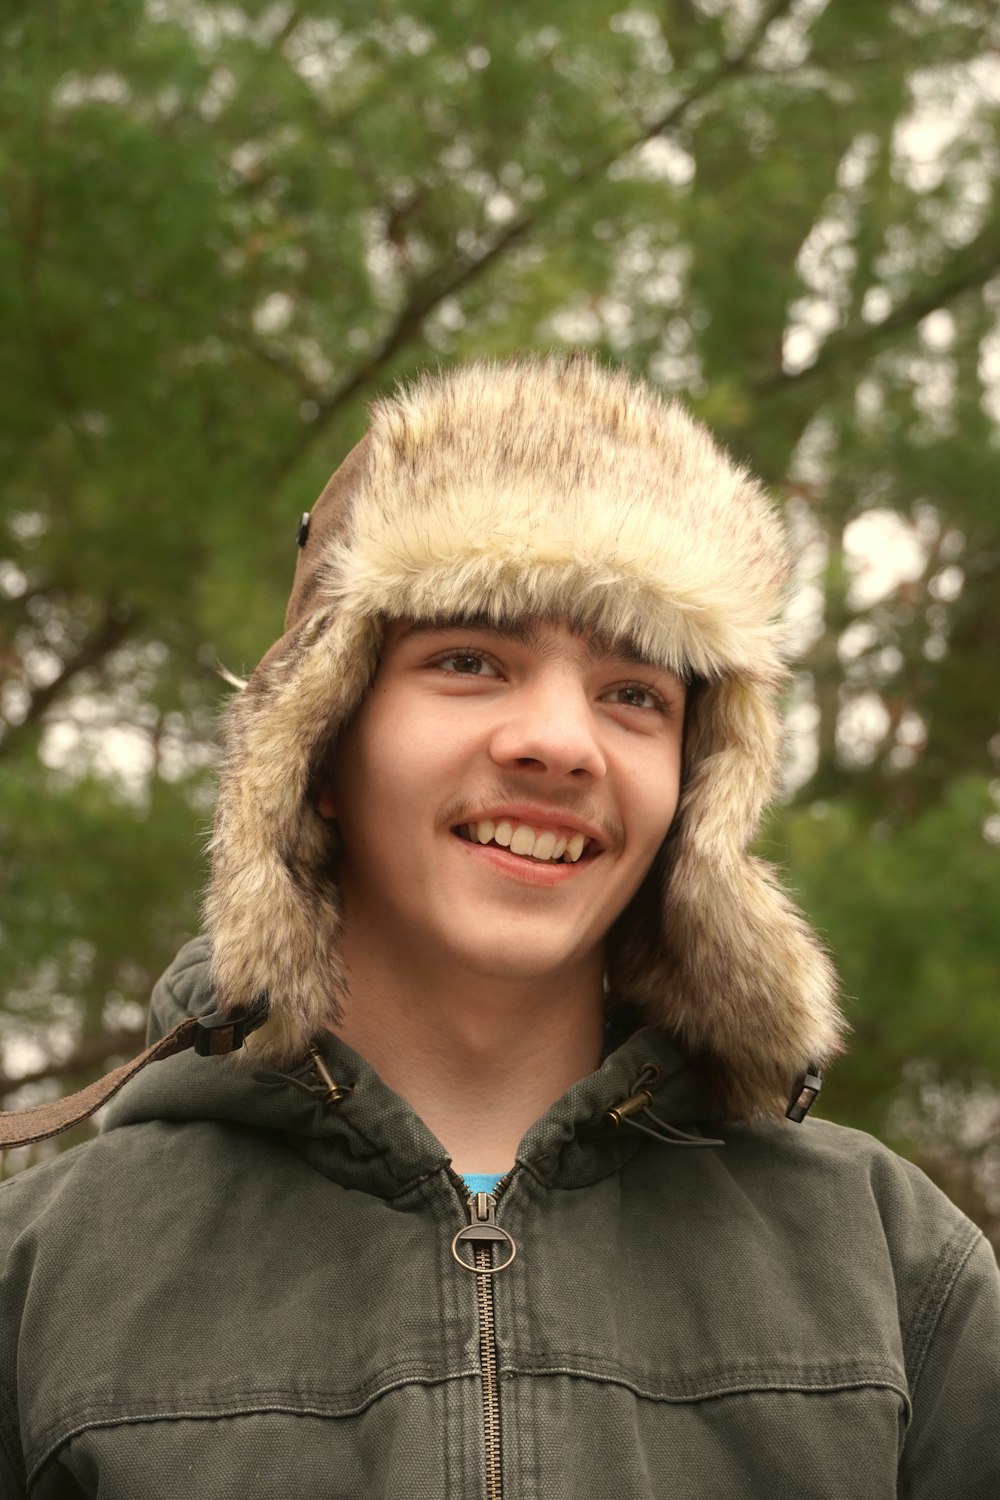 a young man wearing a jacket and a fur hat